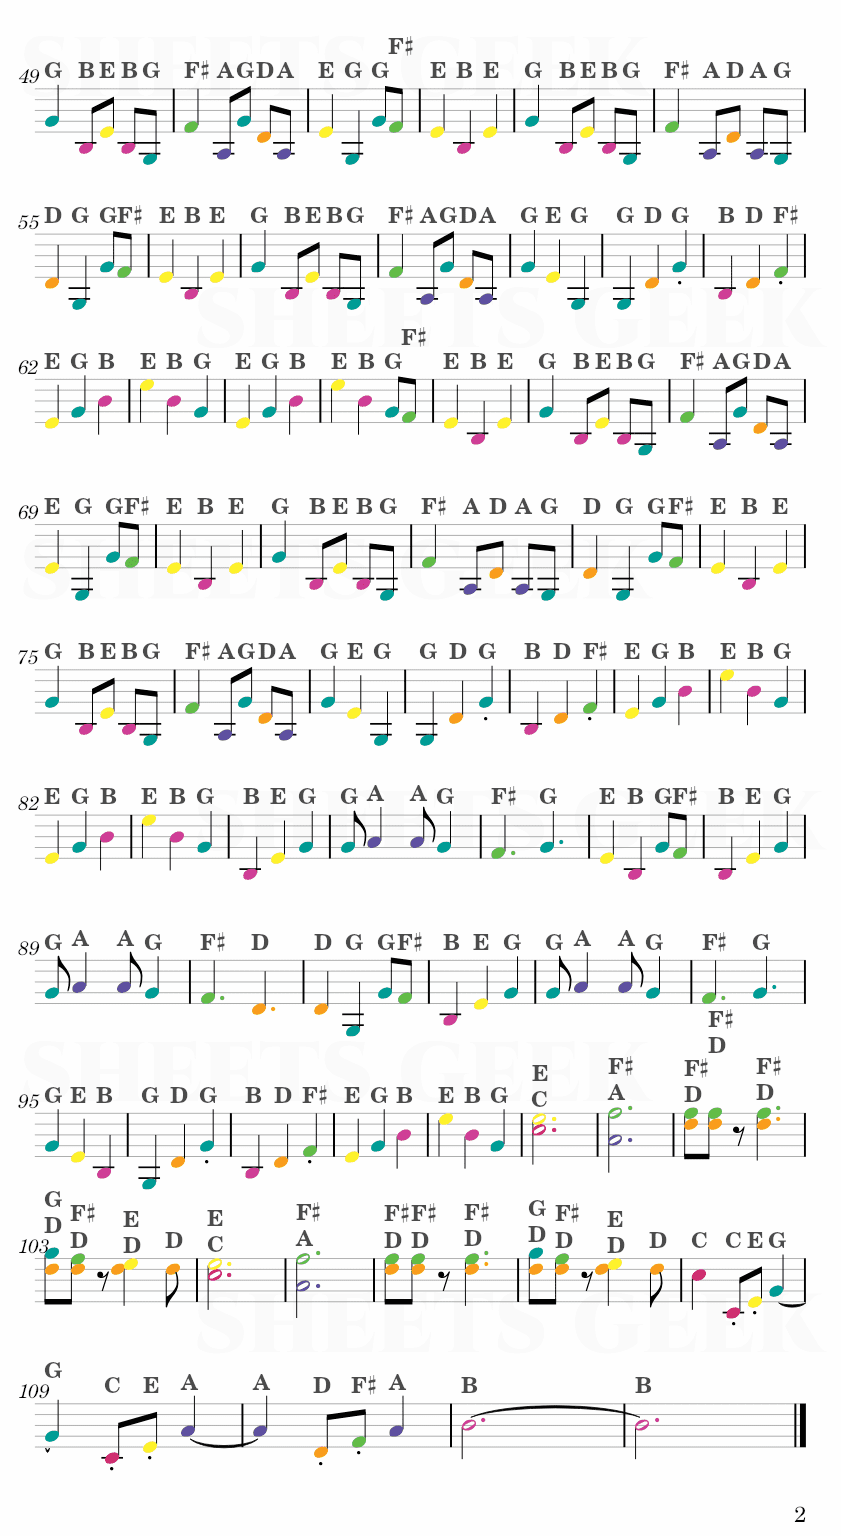 Nothing Else Matters - Metallica Easy Sheet Music Free for piano, keyboard, flute, violin, sax, cello page 2